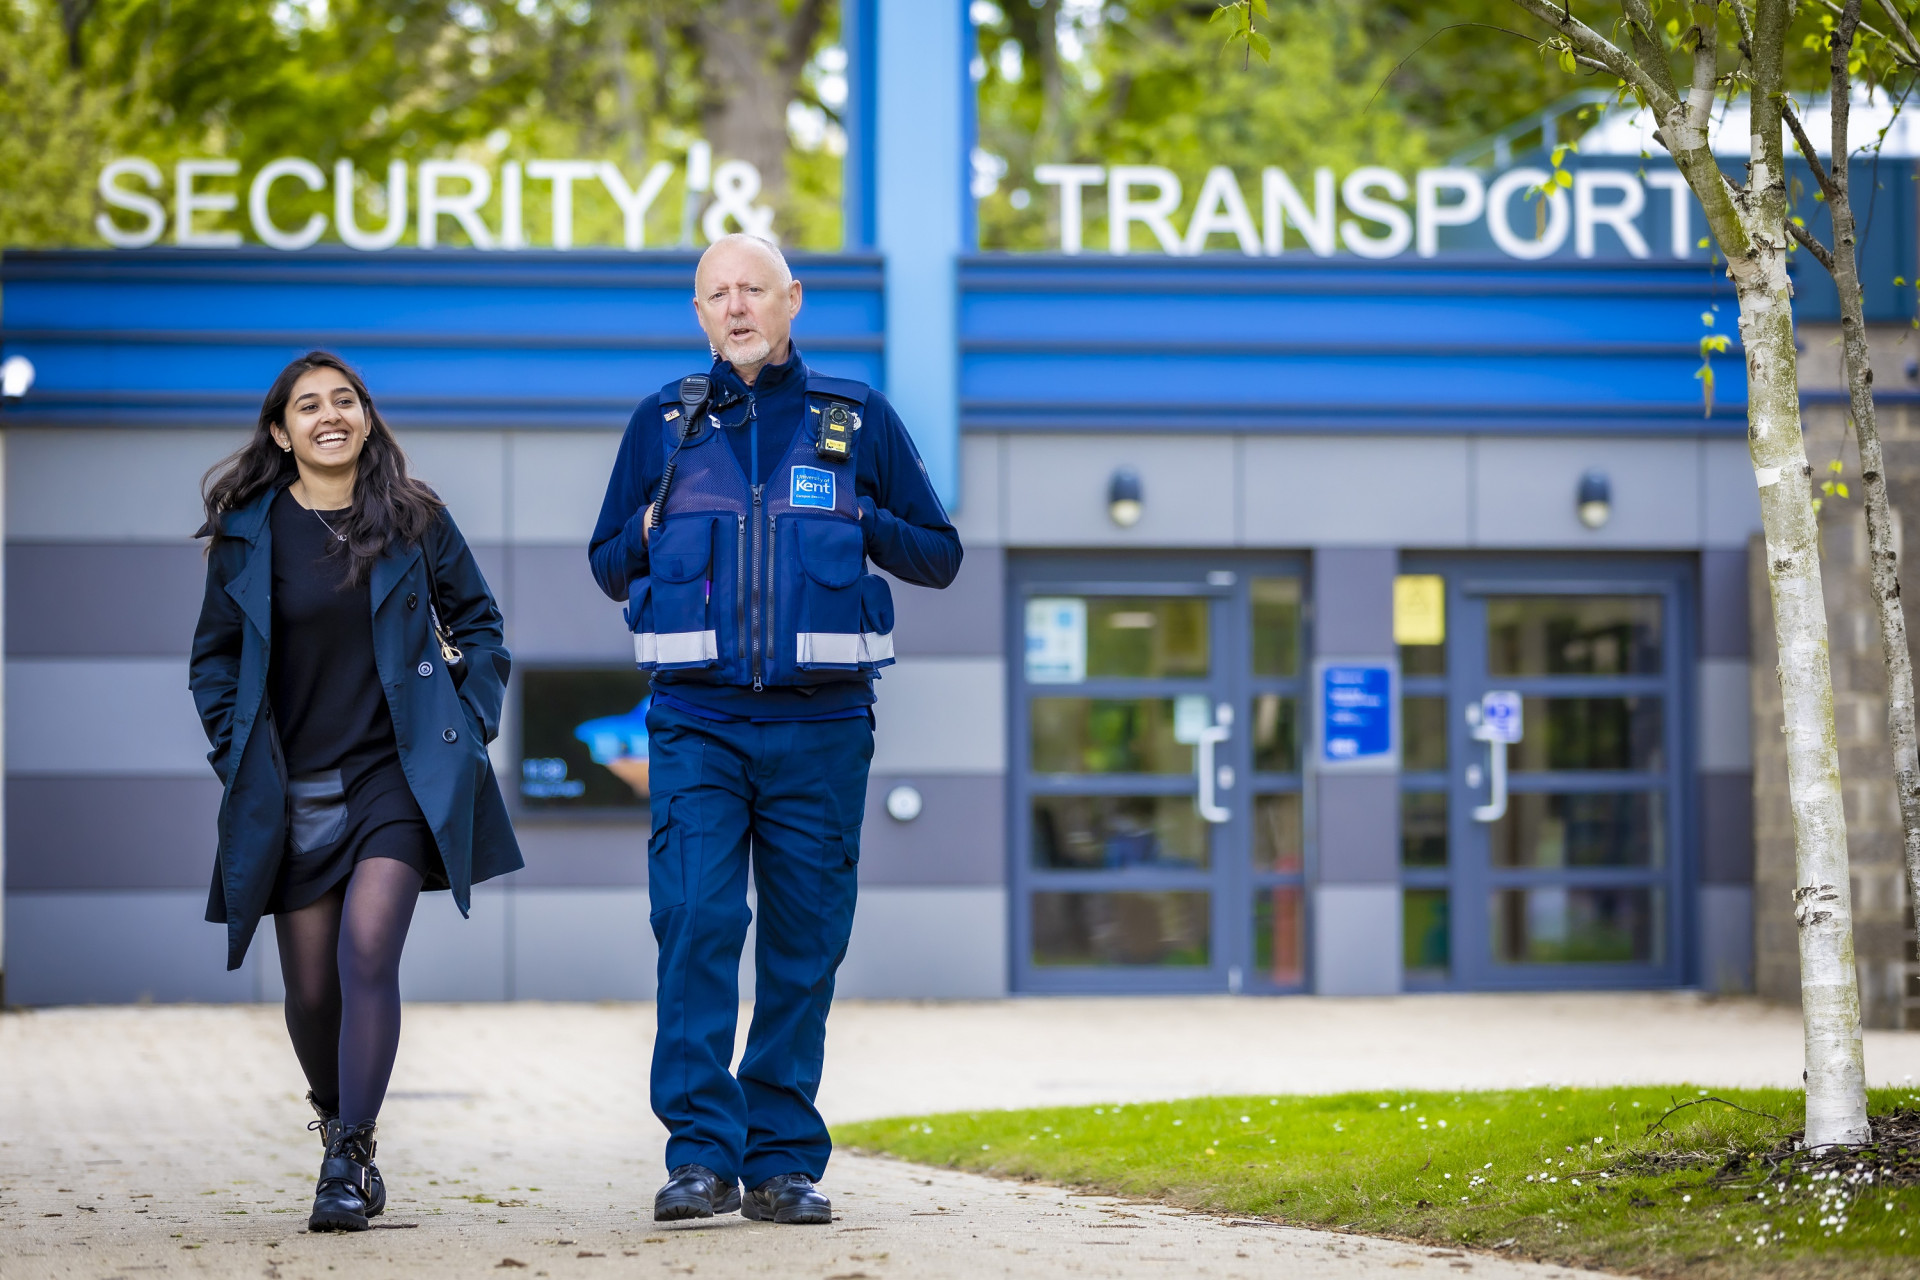 Student and security staff